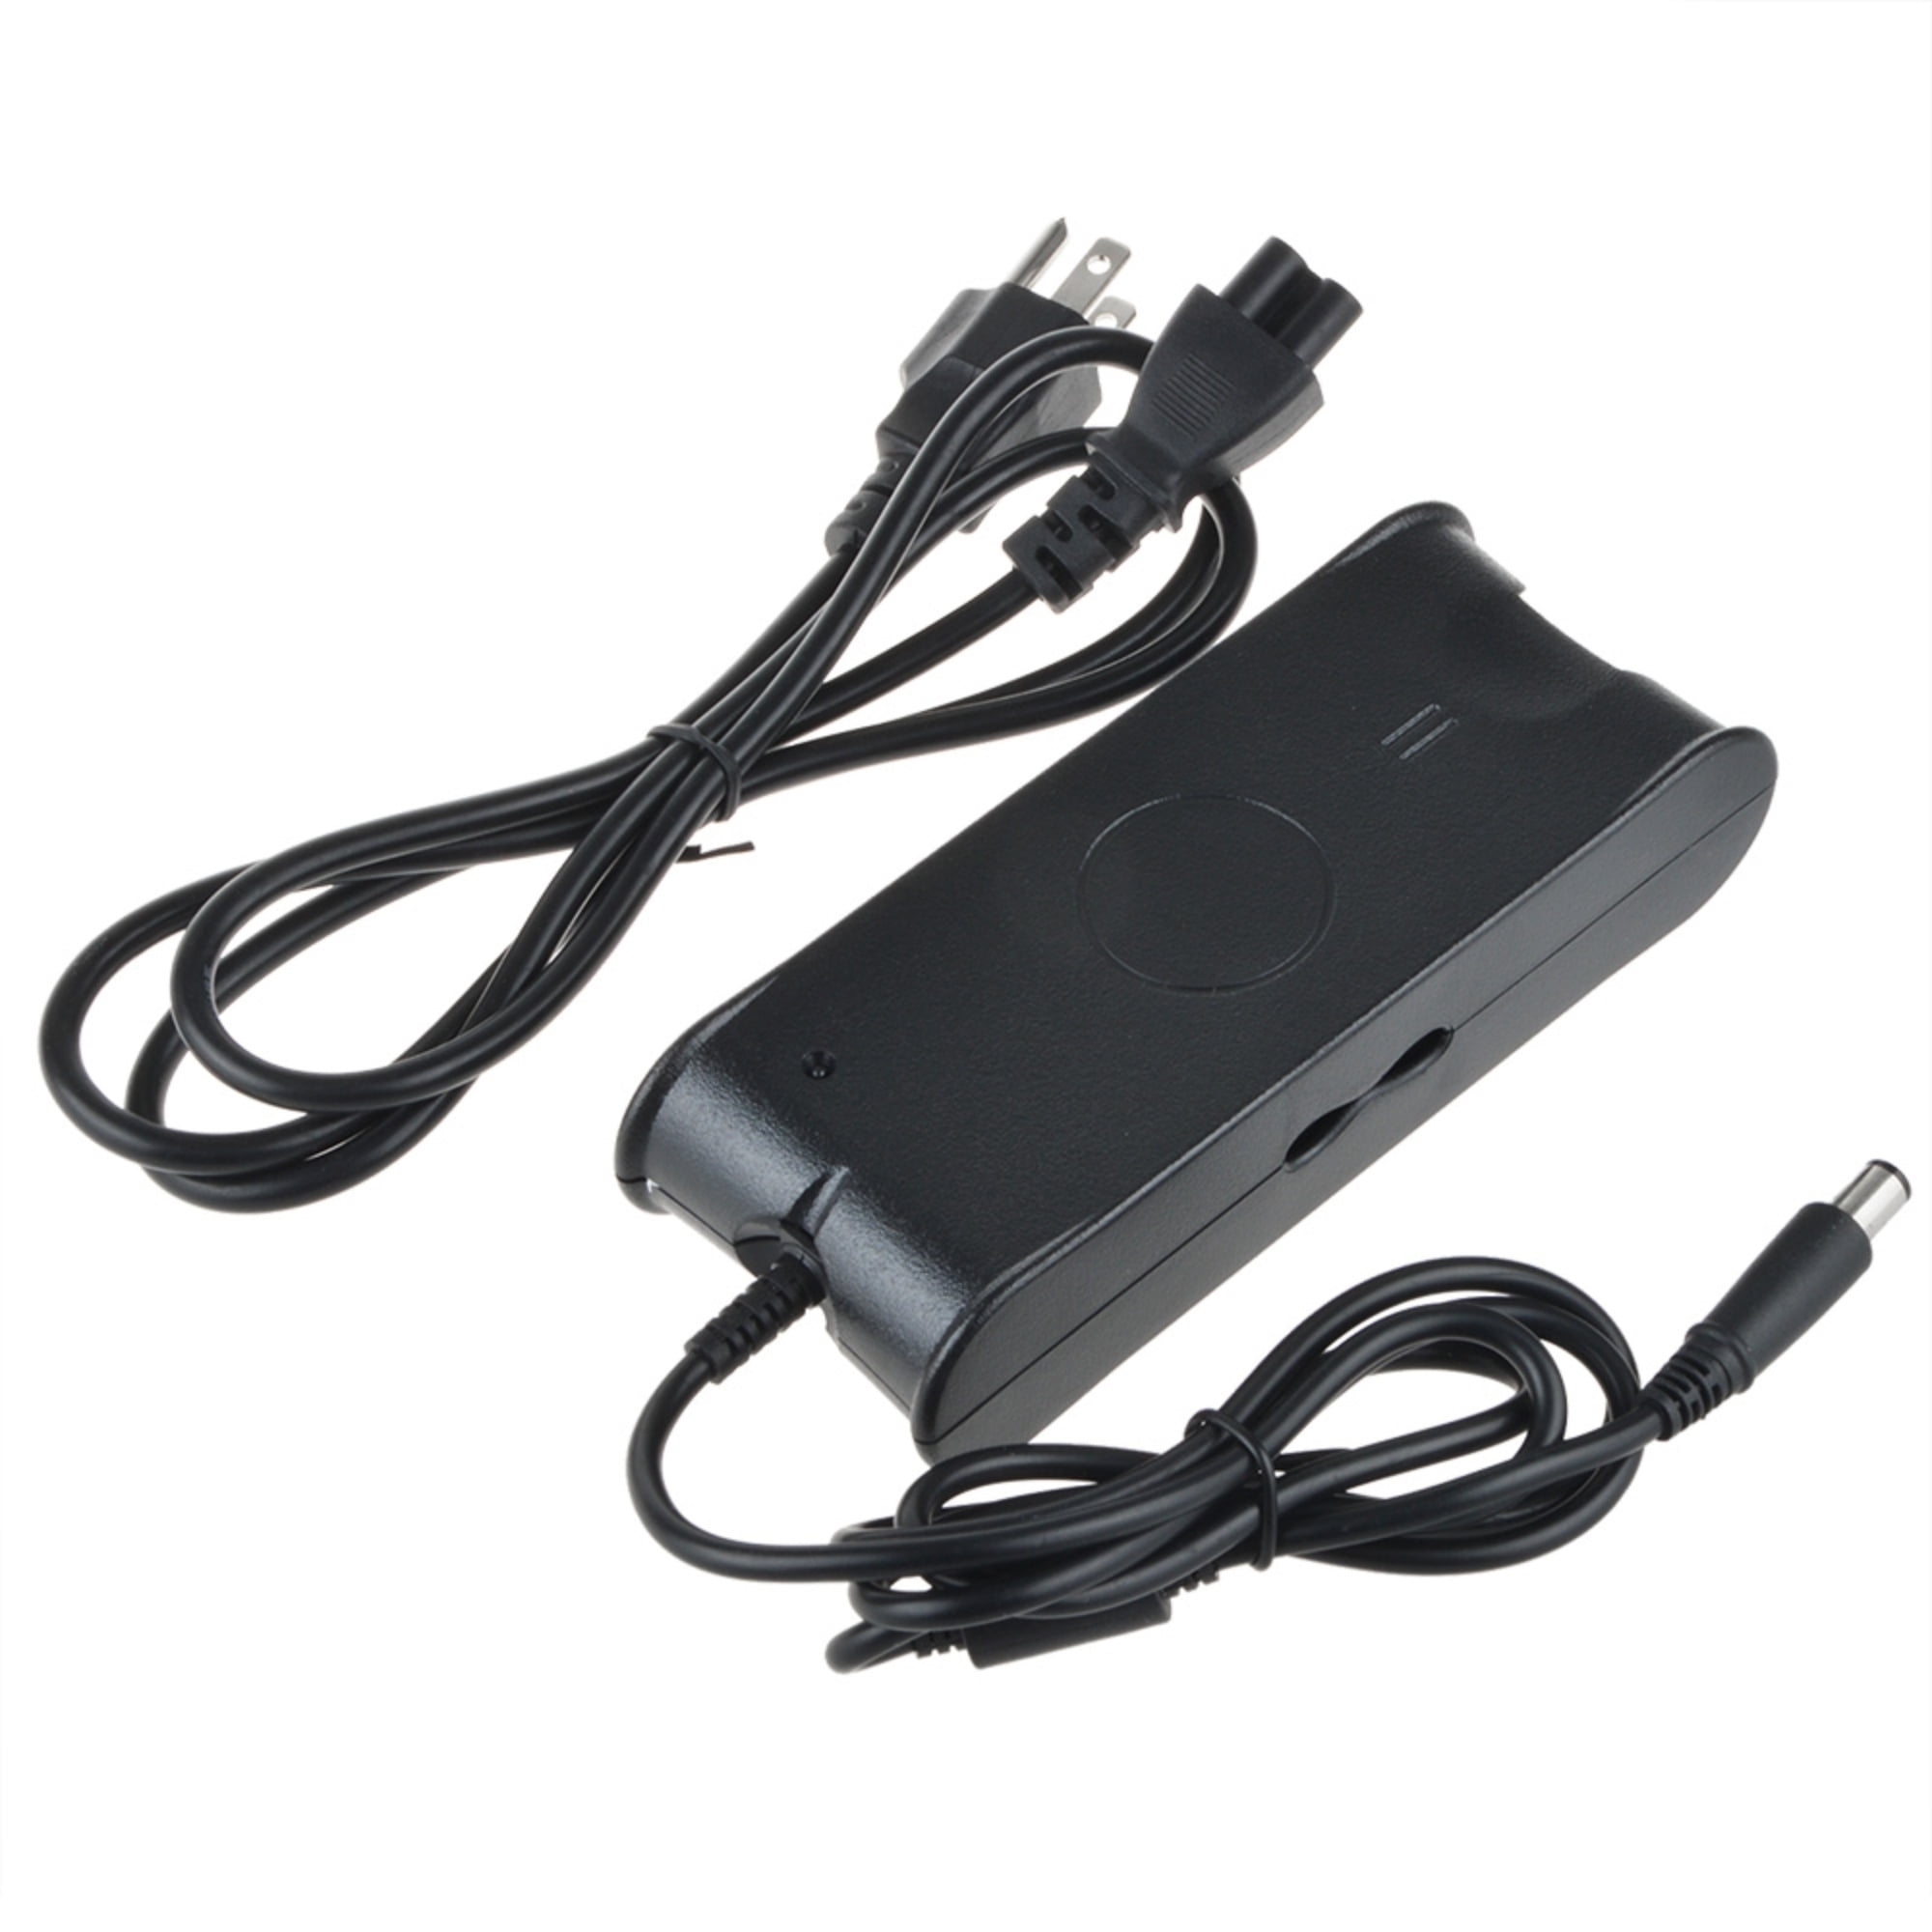 PKPOWER AC Adapter Charger Power Supply for Dell Inspiron 700M 710M E1405  E1505 - Walmart.com